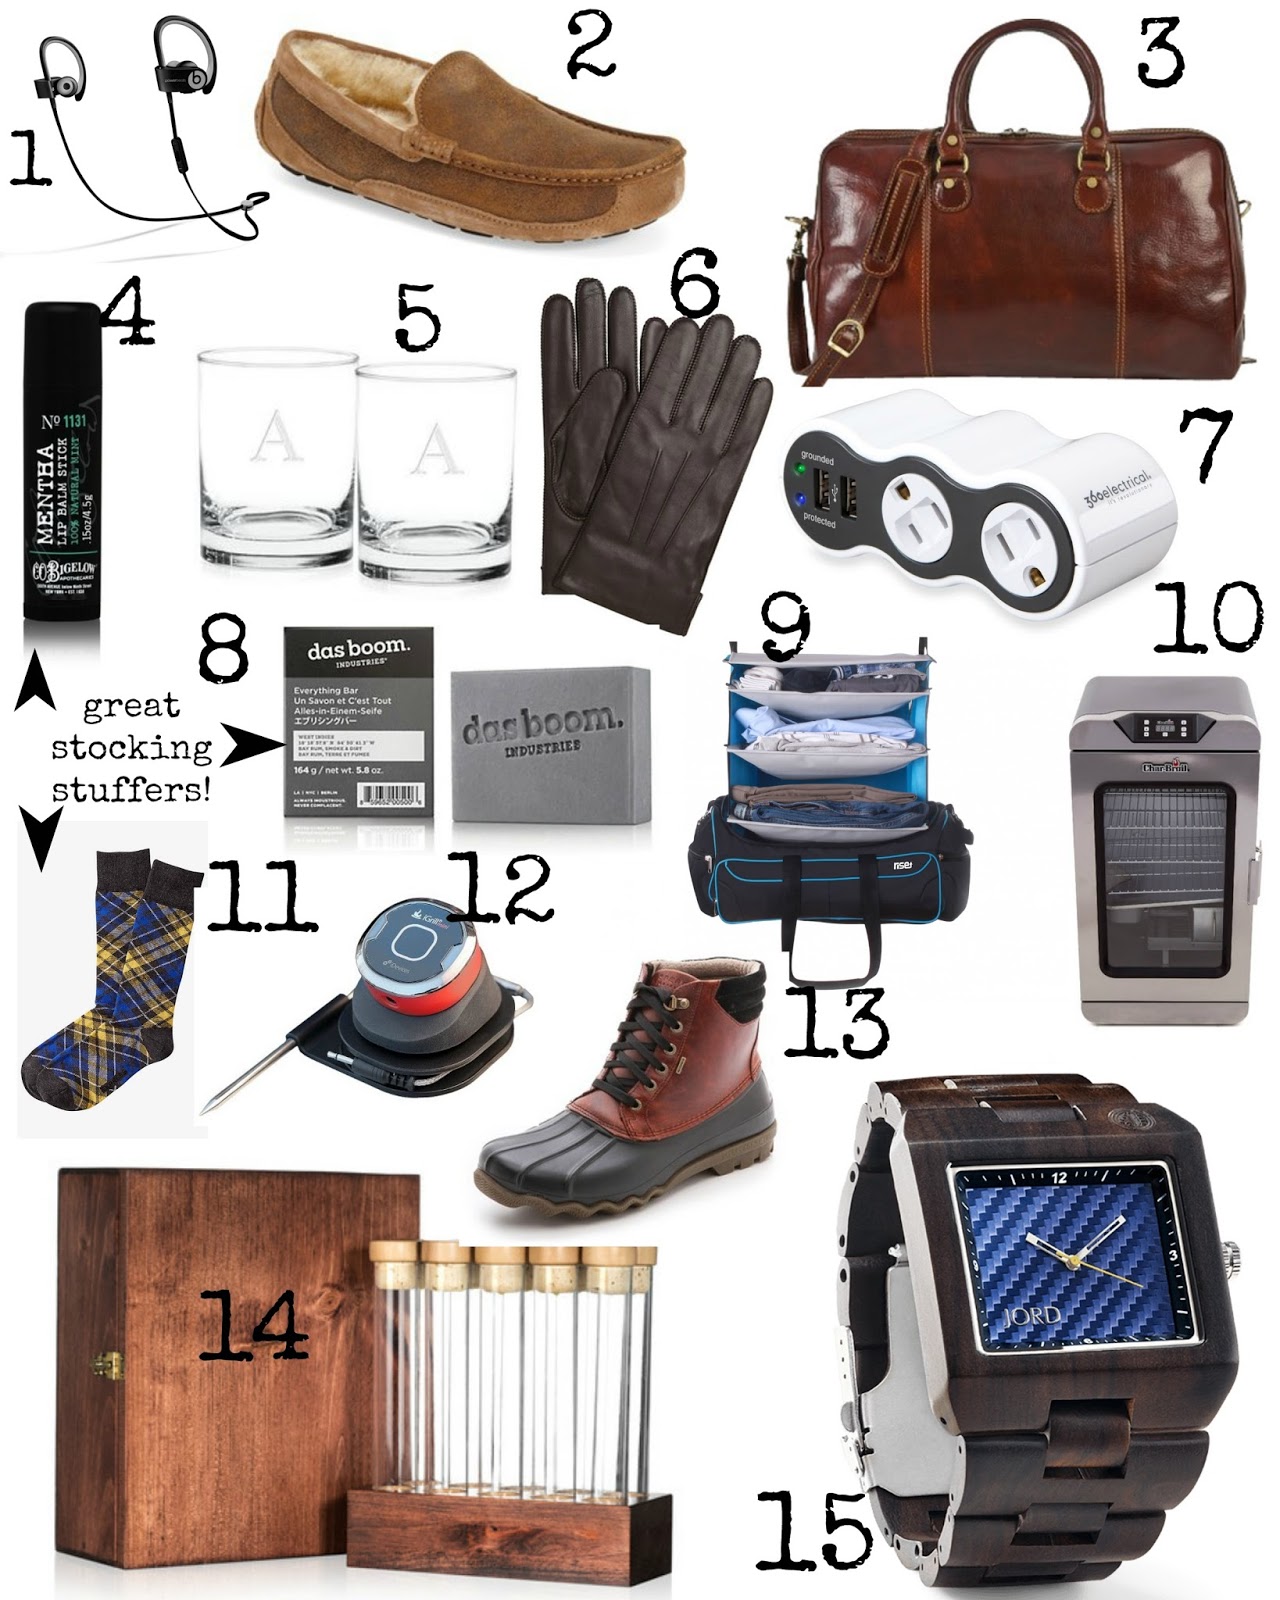 I do deClaire: The Ultimate Gift Guide for Guys